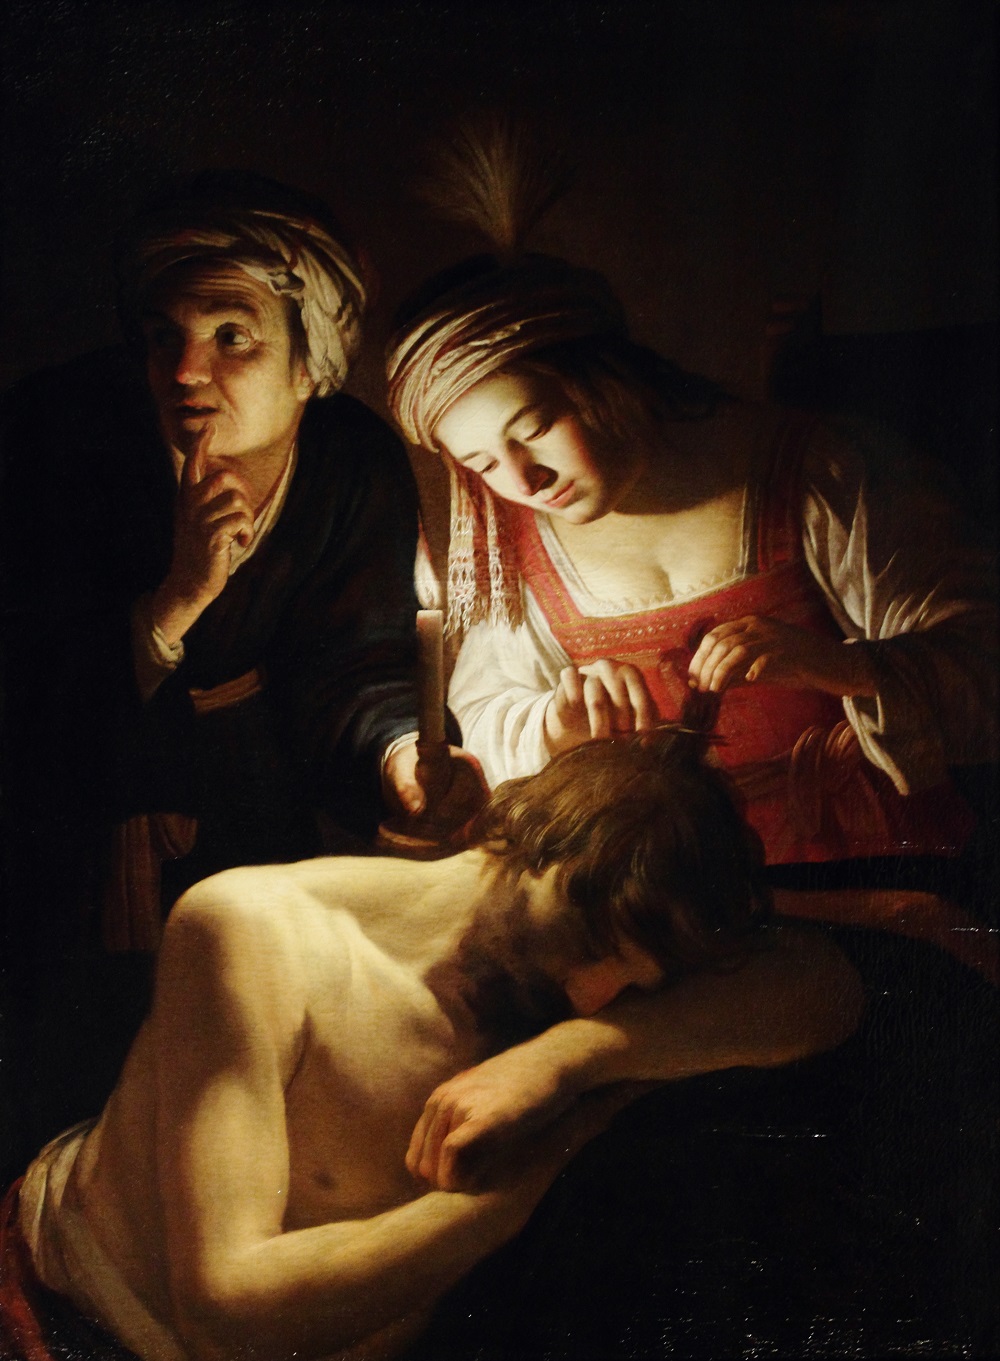 Samson and Delilah, oil on canvas by Gerrit van Hondhorst, 1615 (from the Cleveland Museum of Art collection)